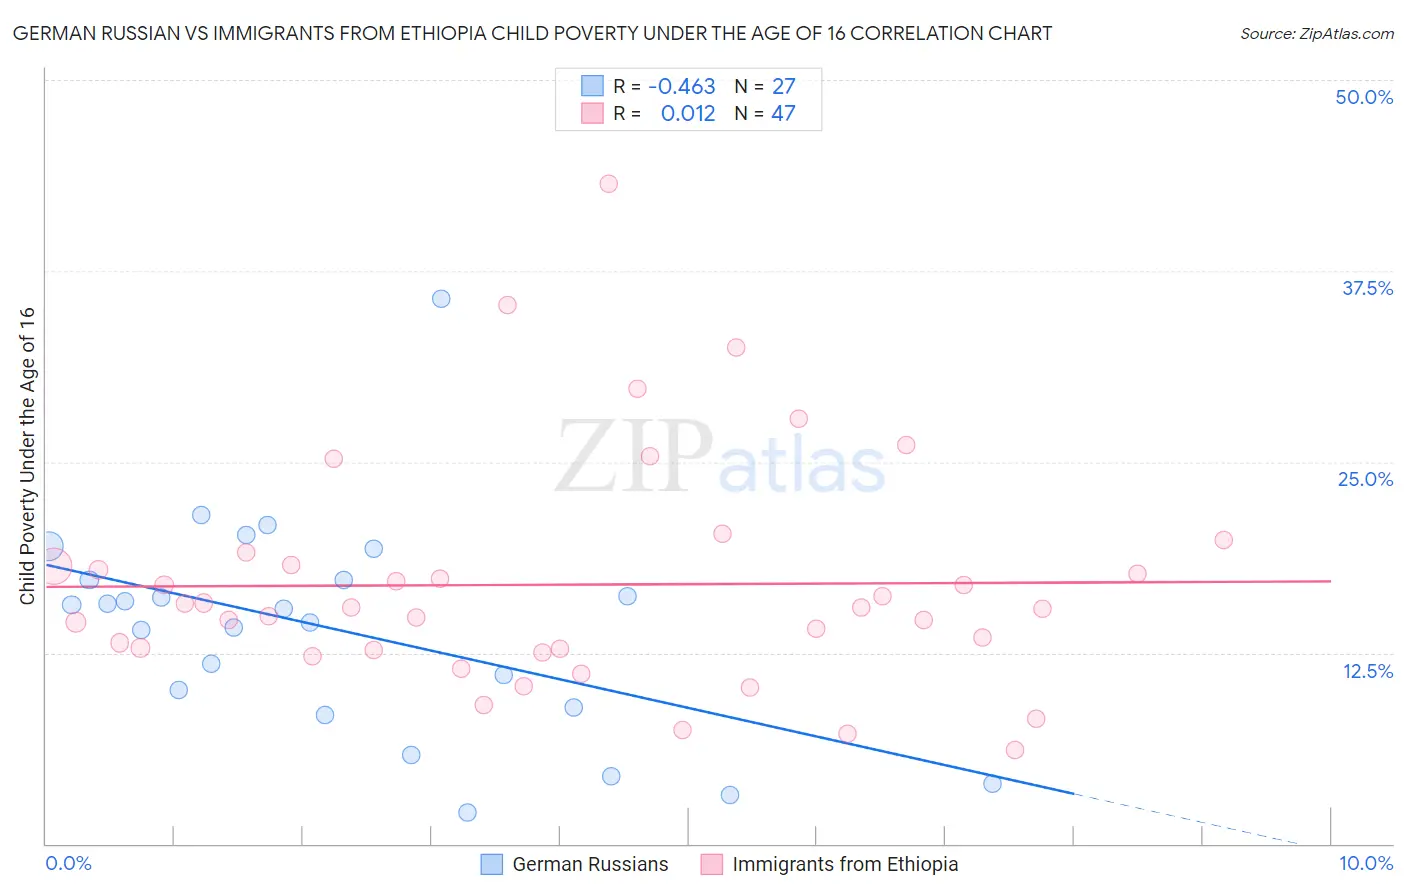 German Russian vs Immigrants from Ethiopia Child Poverty Under the Age of 16